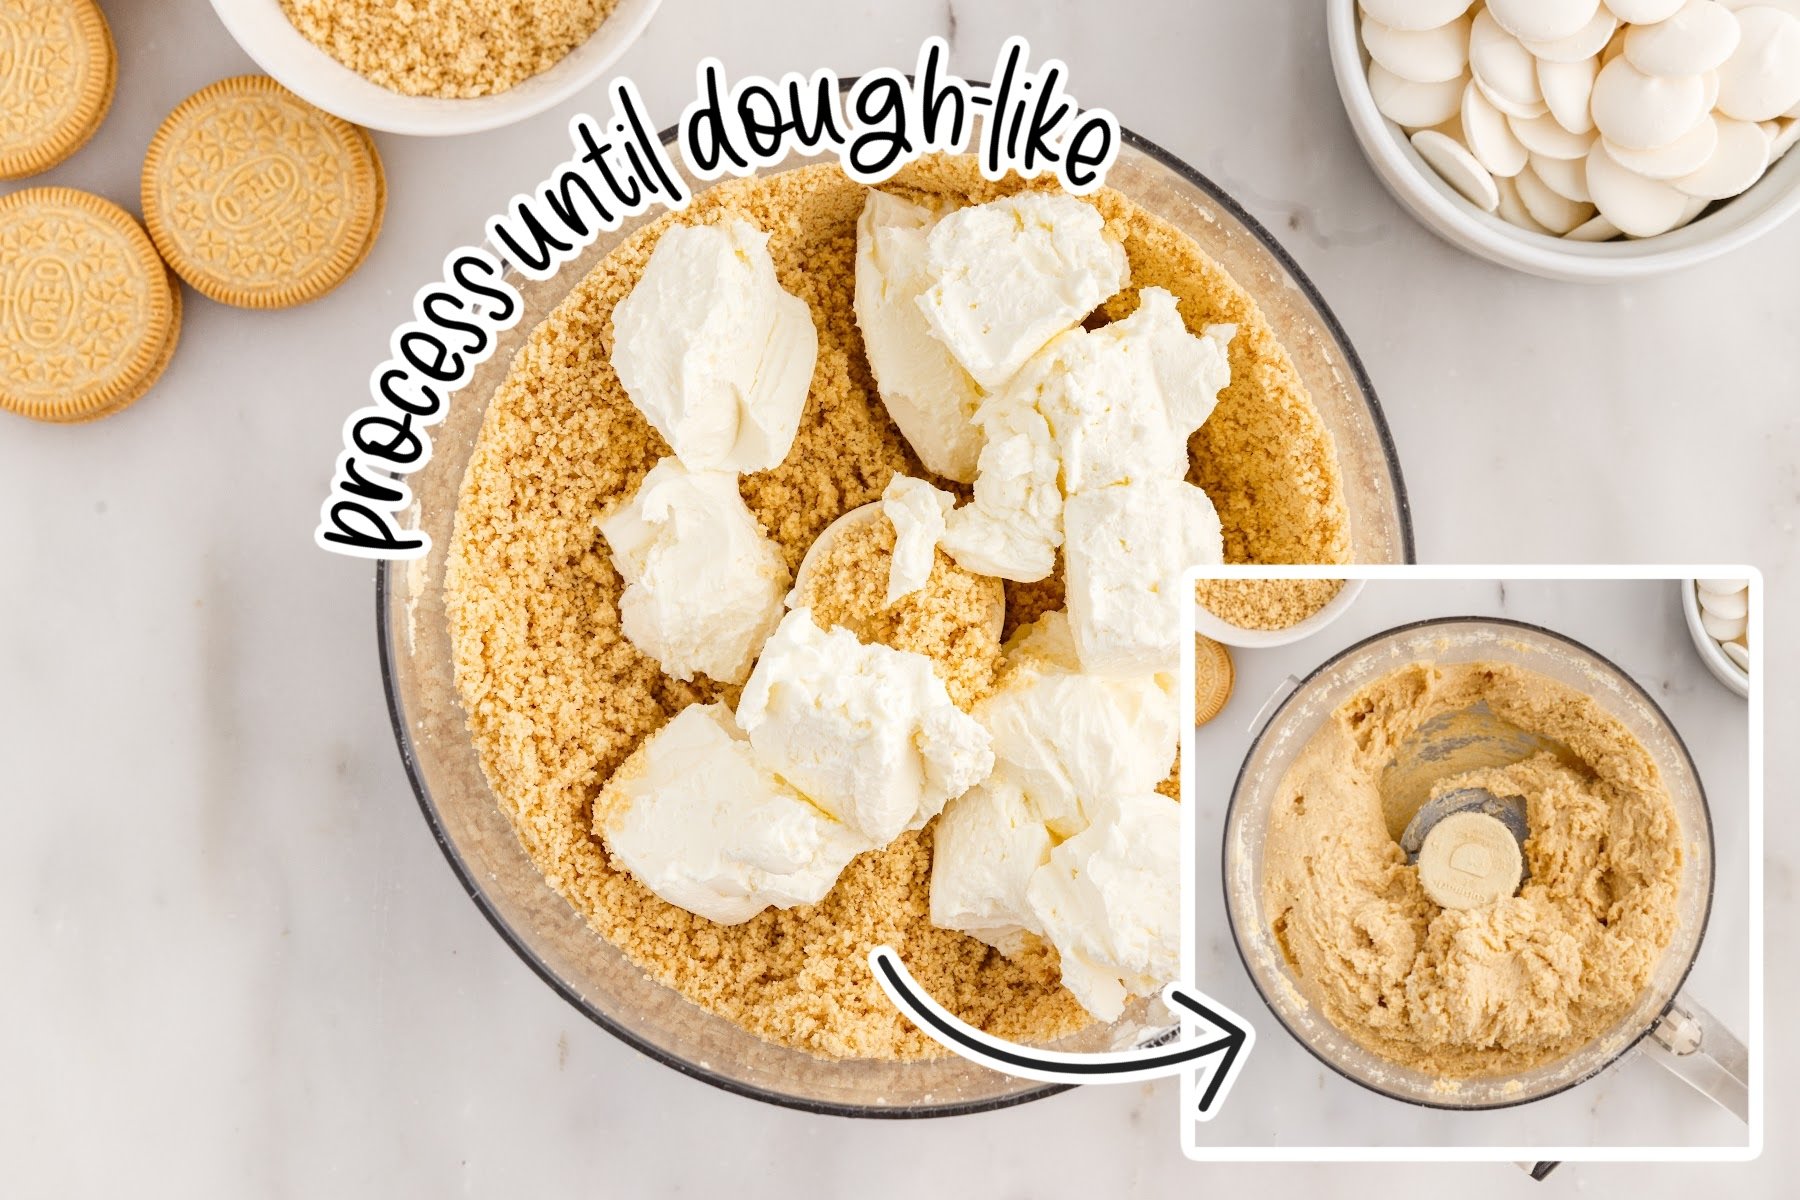 Two images of cream cheese added to Golden Oreos and mixture after it has been processed in a food processor with text overlay.